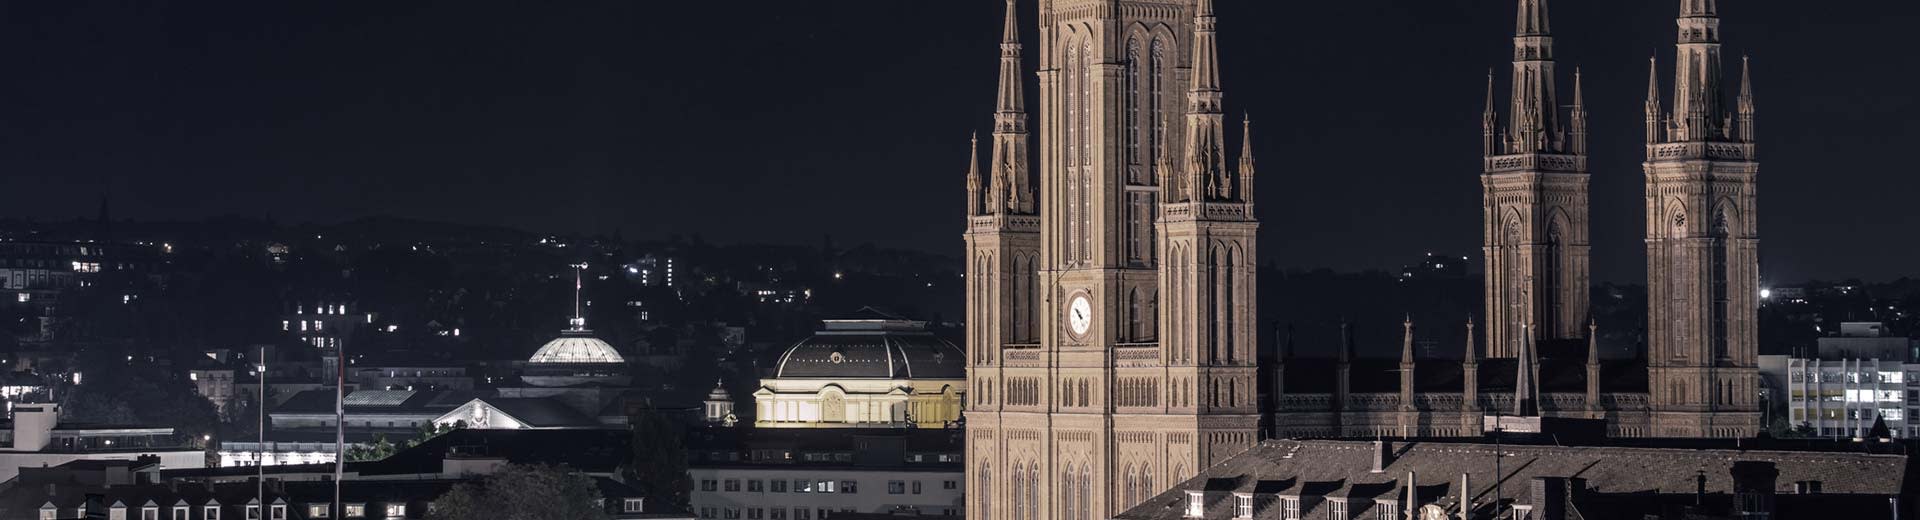 The world-famous Marktkirche dominates the foreground of Wiesbaden, with the lights of buildings in the distance.